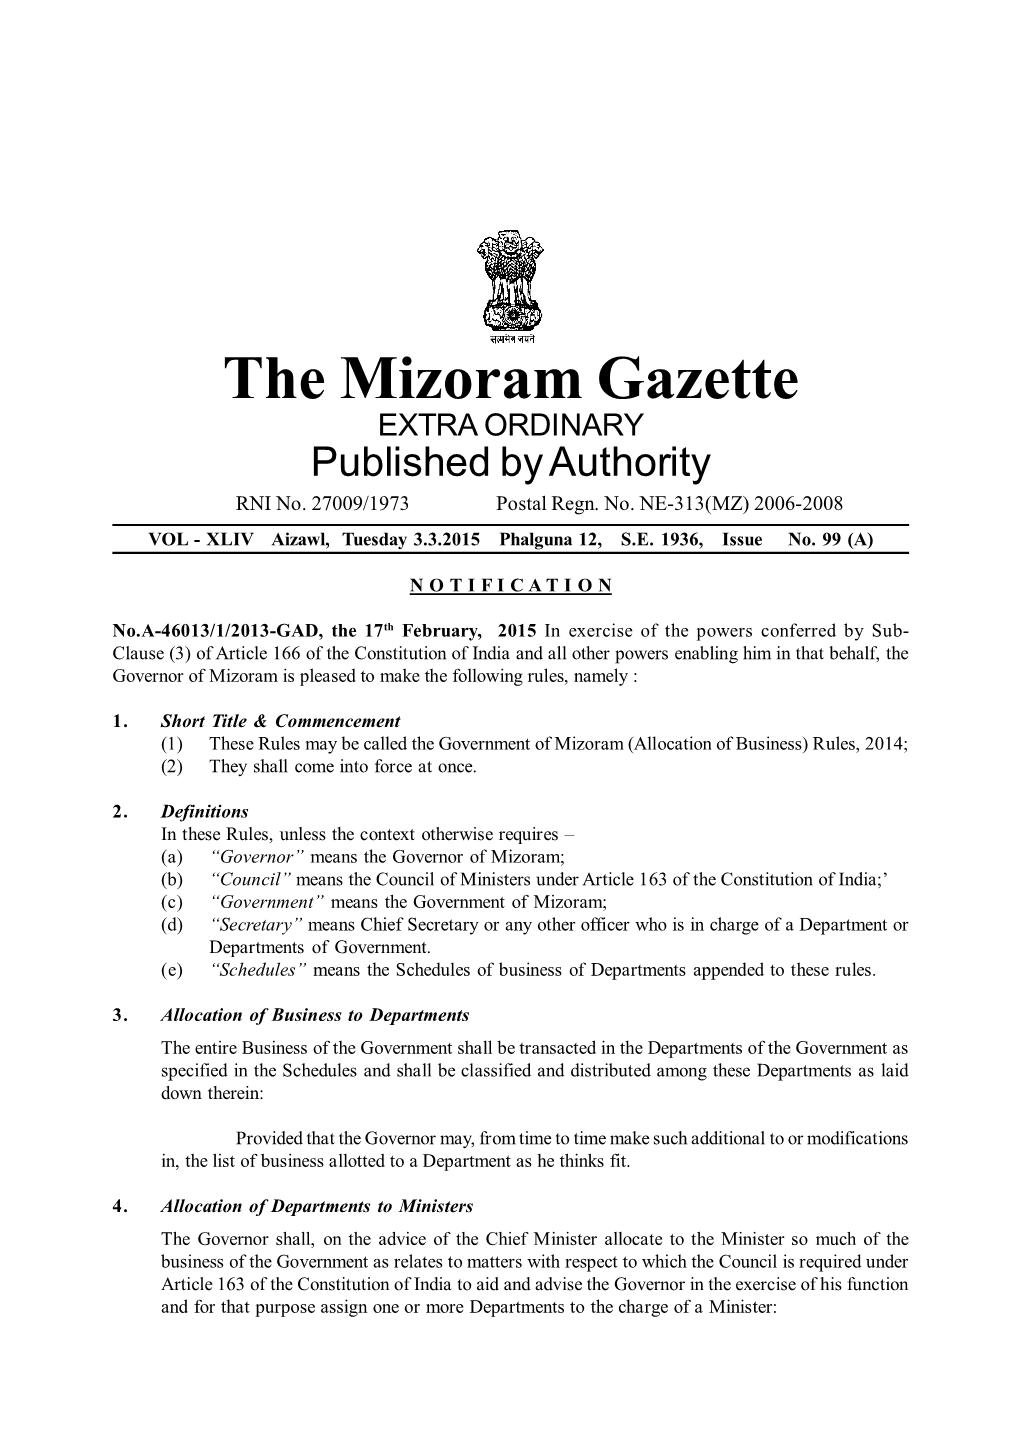 Mizoram (Allocation of Business) Rules, 2014; (2) They Shall Come Into Force at Once